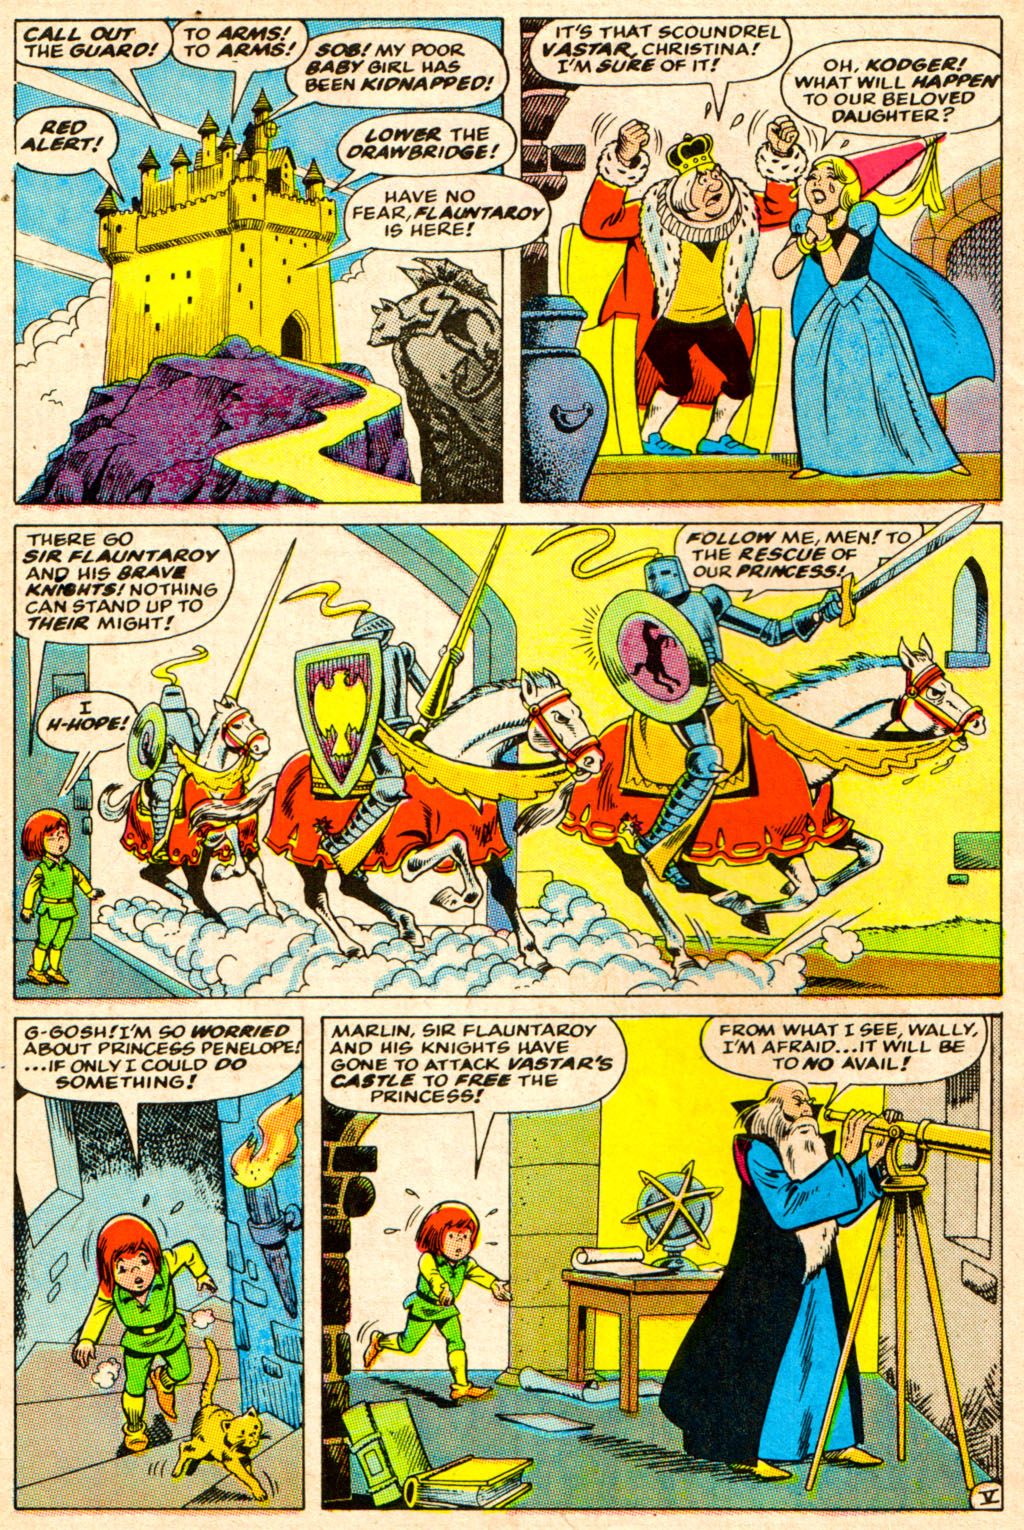 Read online Wally the Wizard comic -  Issue #5 - 6